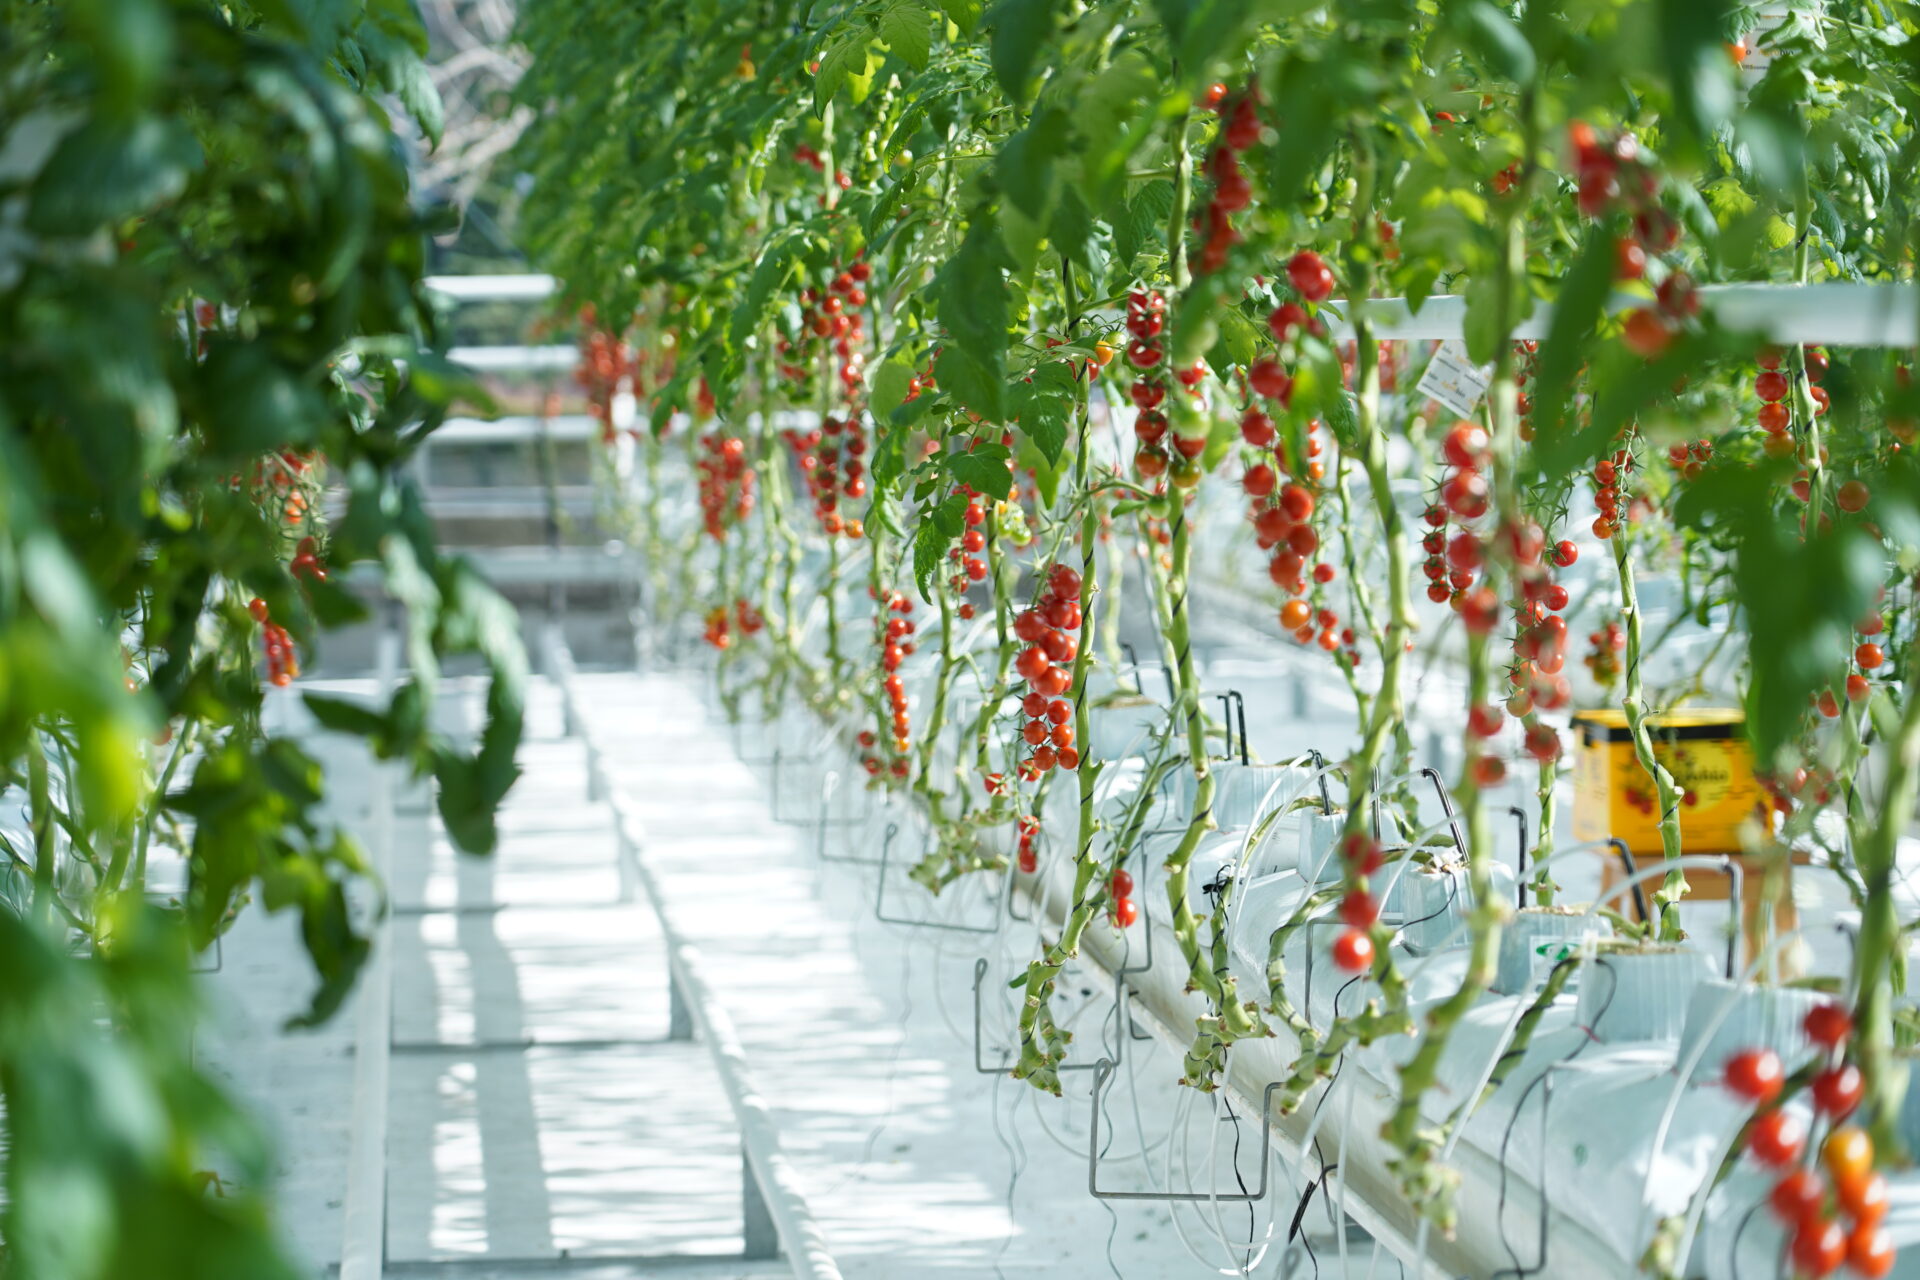 Cherry tomatoes growing in the research greenhouse at the University of Agronomic Sciences and Veterinary Medicine of Bucharest (USAMV), Romania